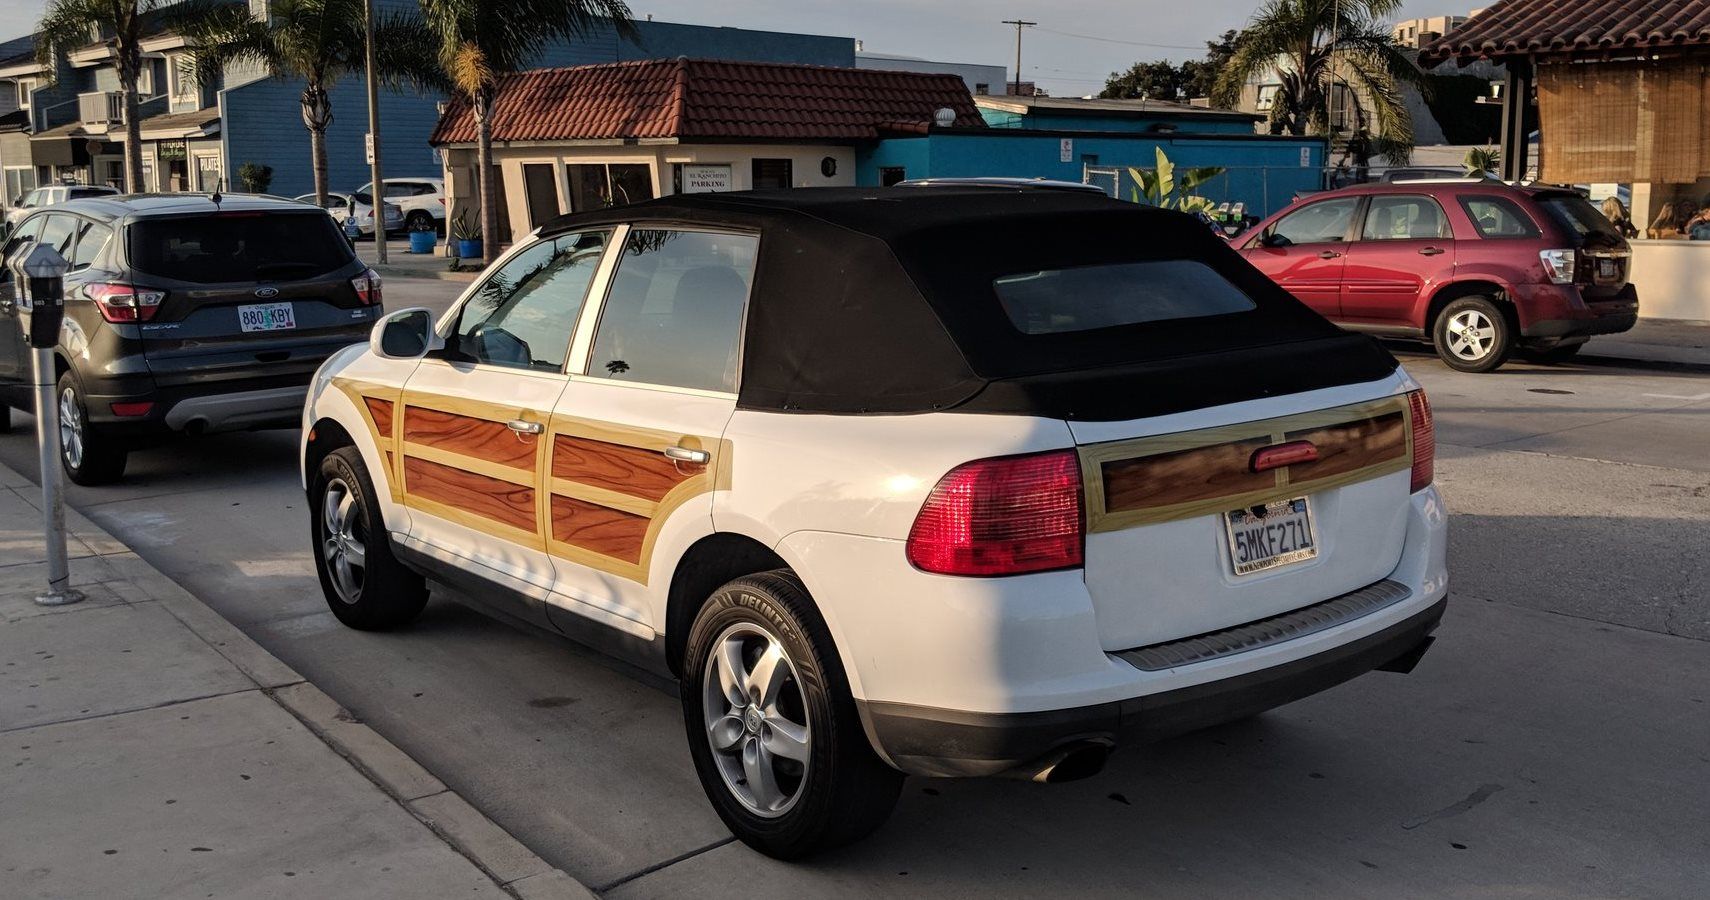 Check Out This Wood Paneled Porsche Cayenne